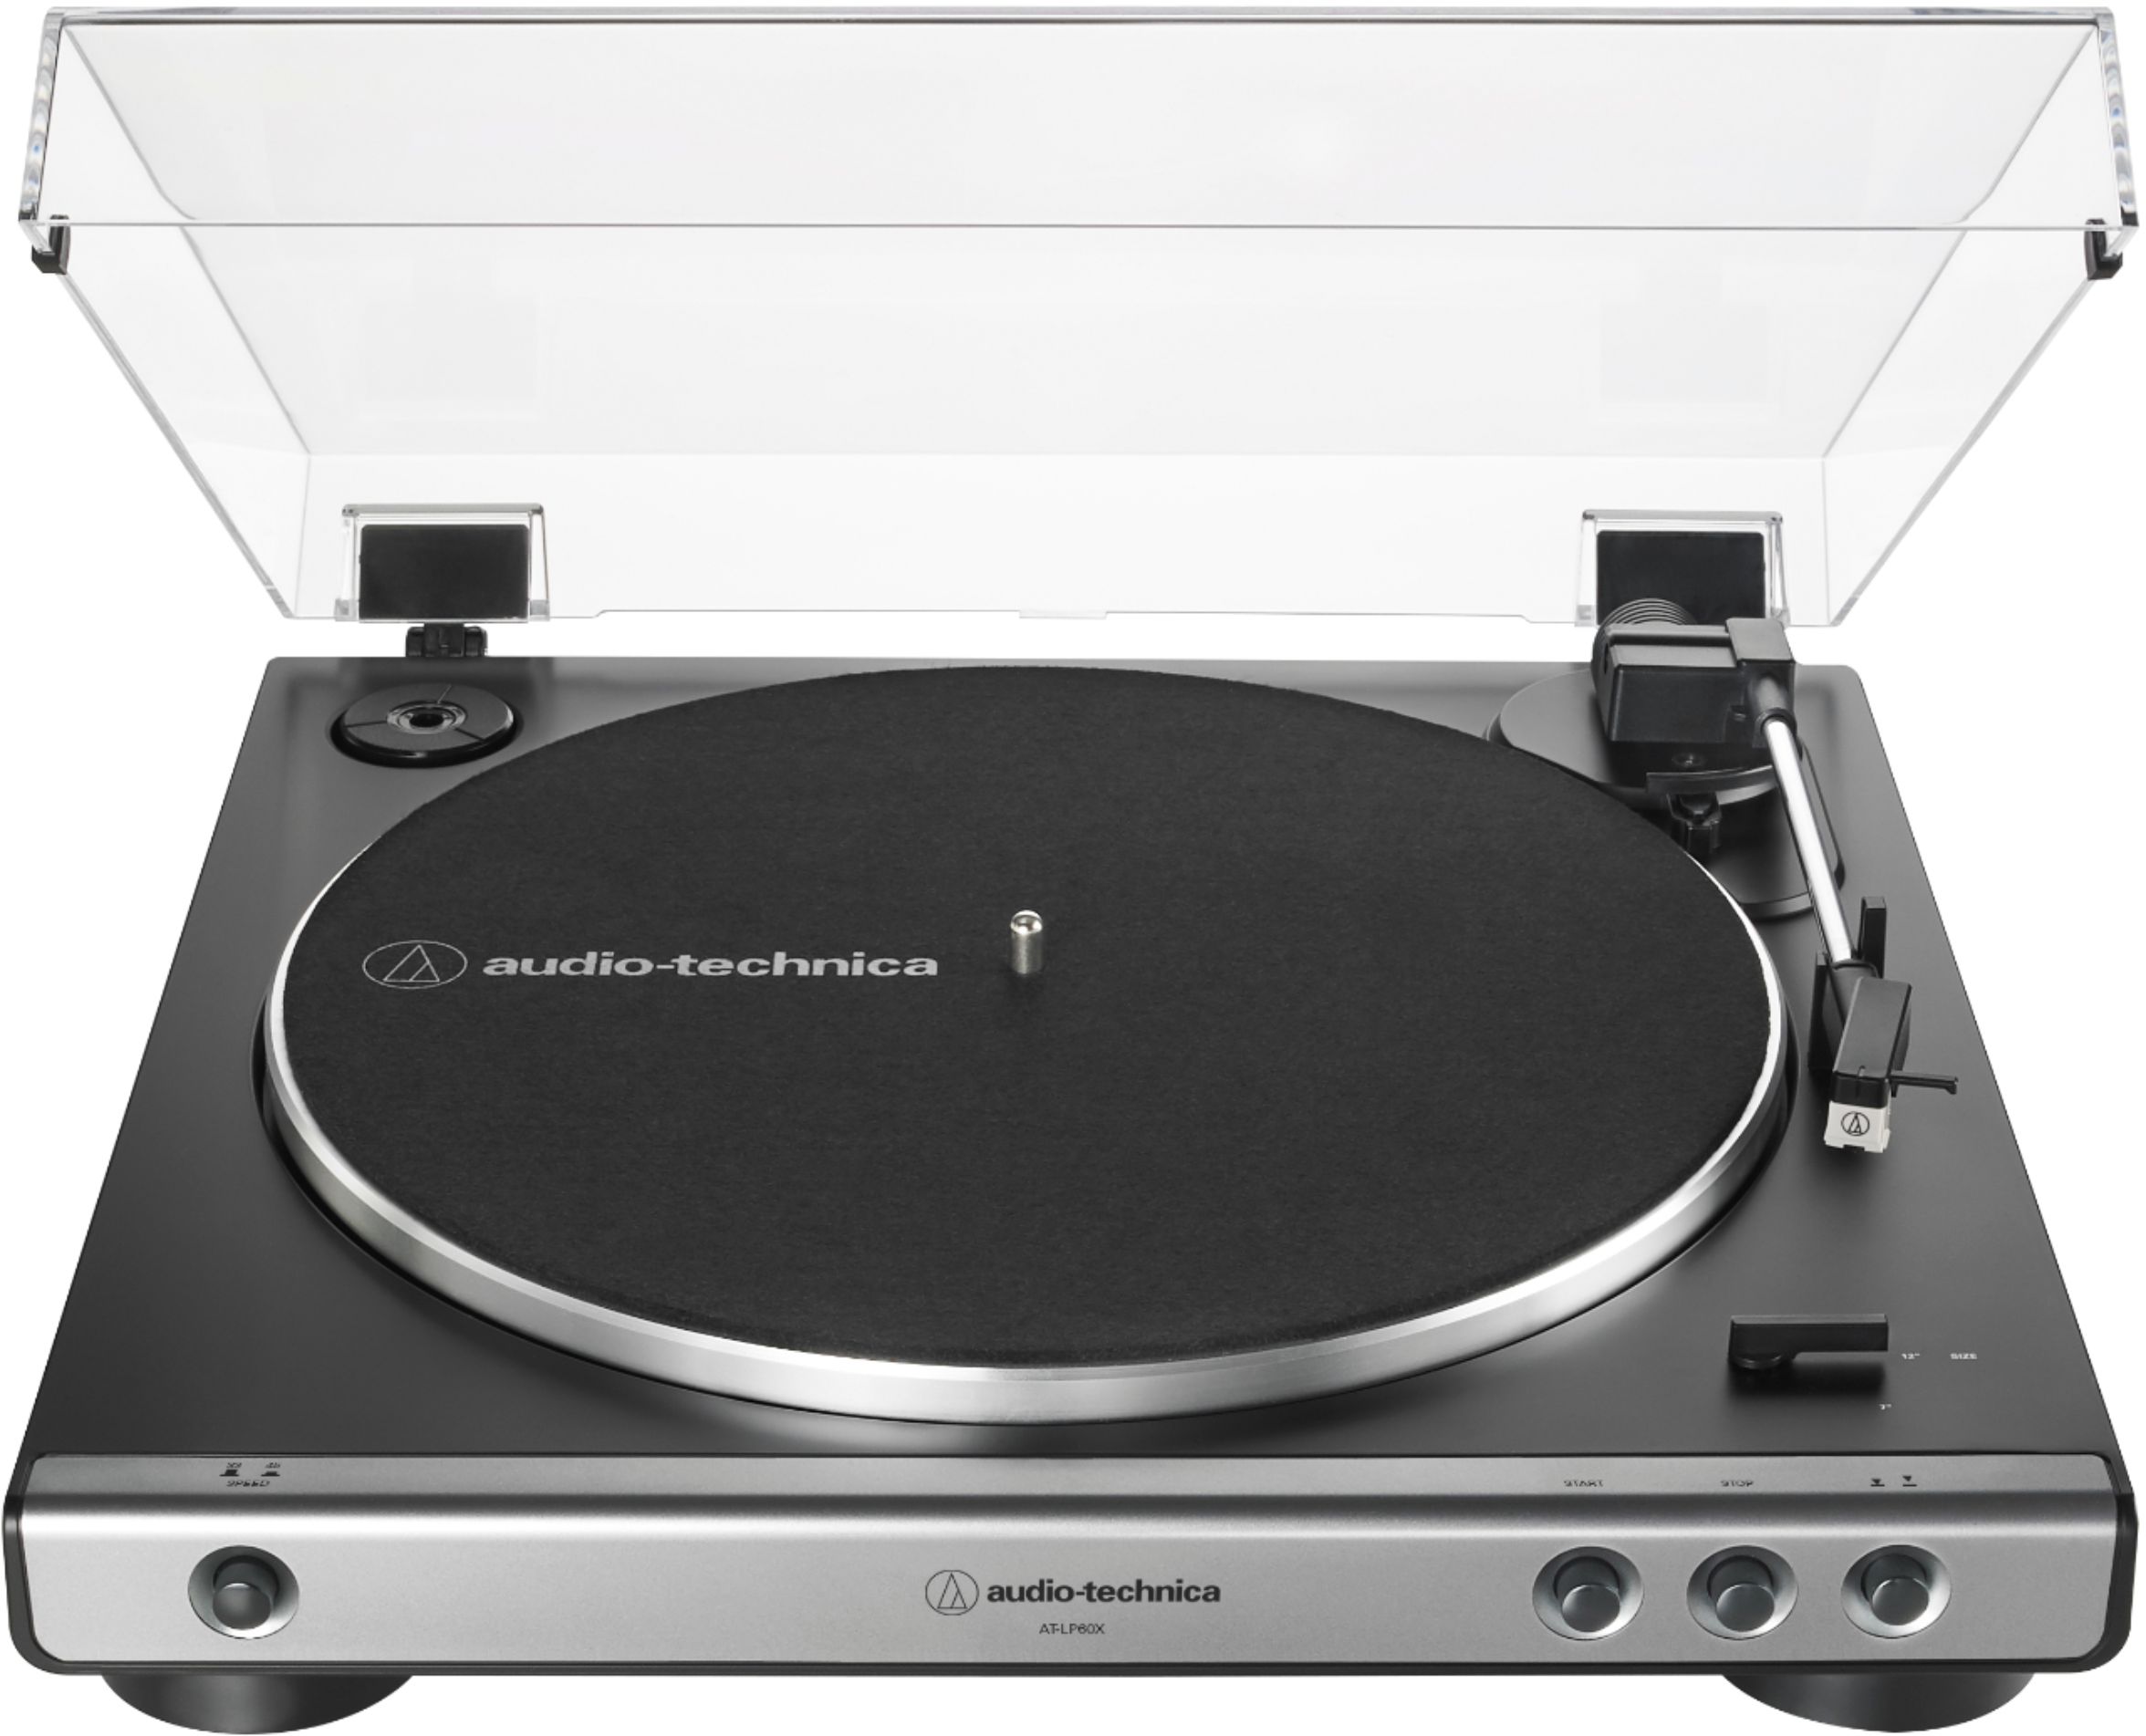 Fully Automatic Belt-Drive Stereo Turntable, AT-LP60X, Audio-Technica